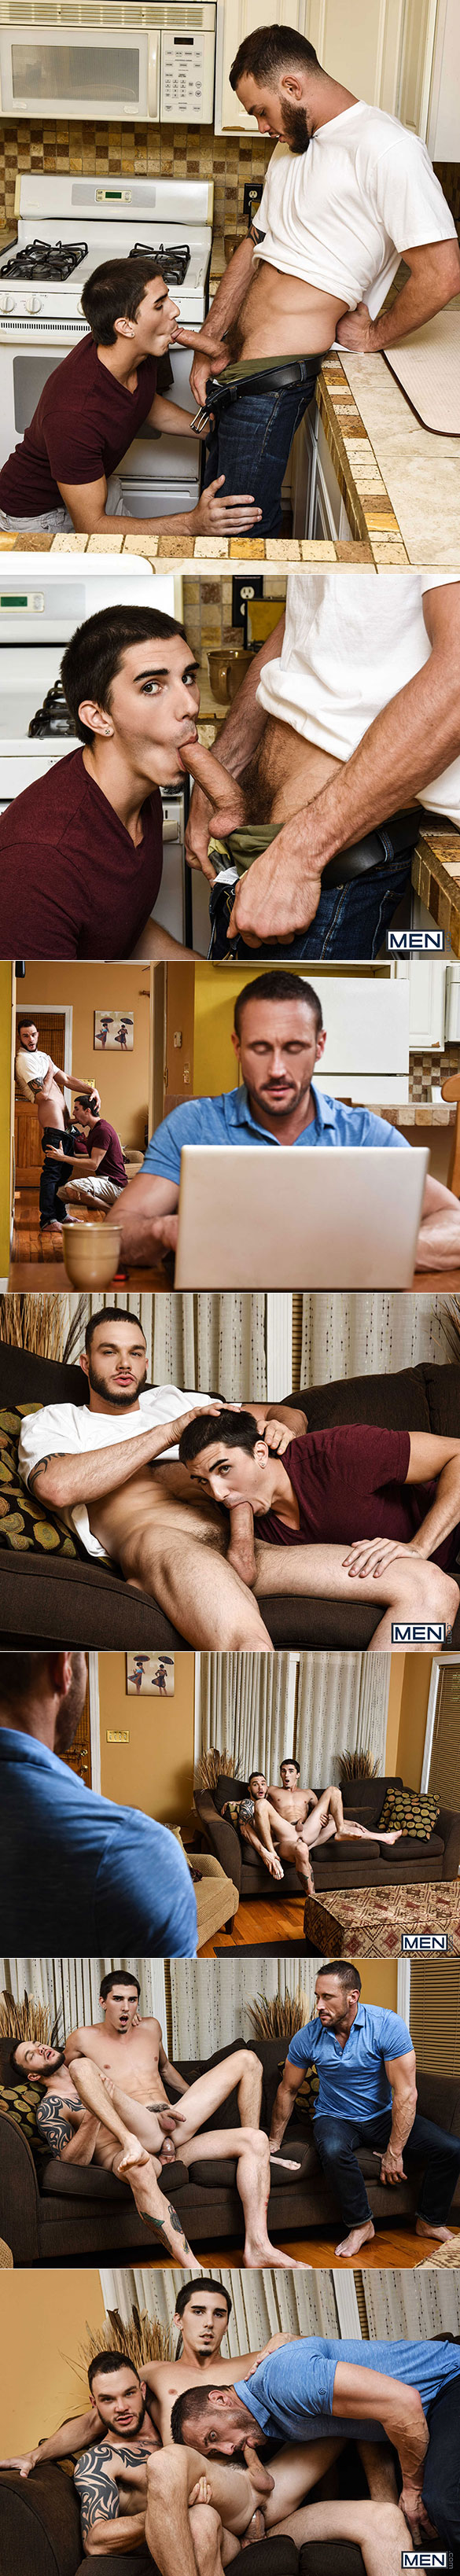 Men.com: Damien Kyle bottoms for big-dicked Myles Landon and Cliff Jensen in "Coffee Time"